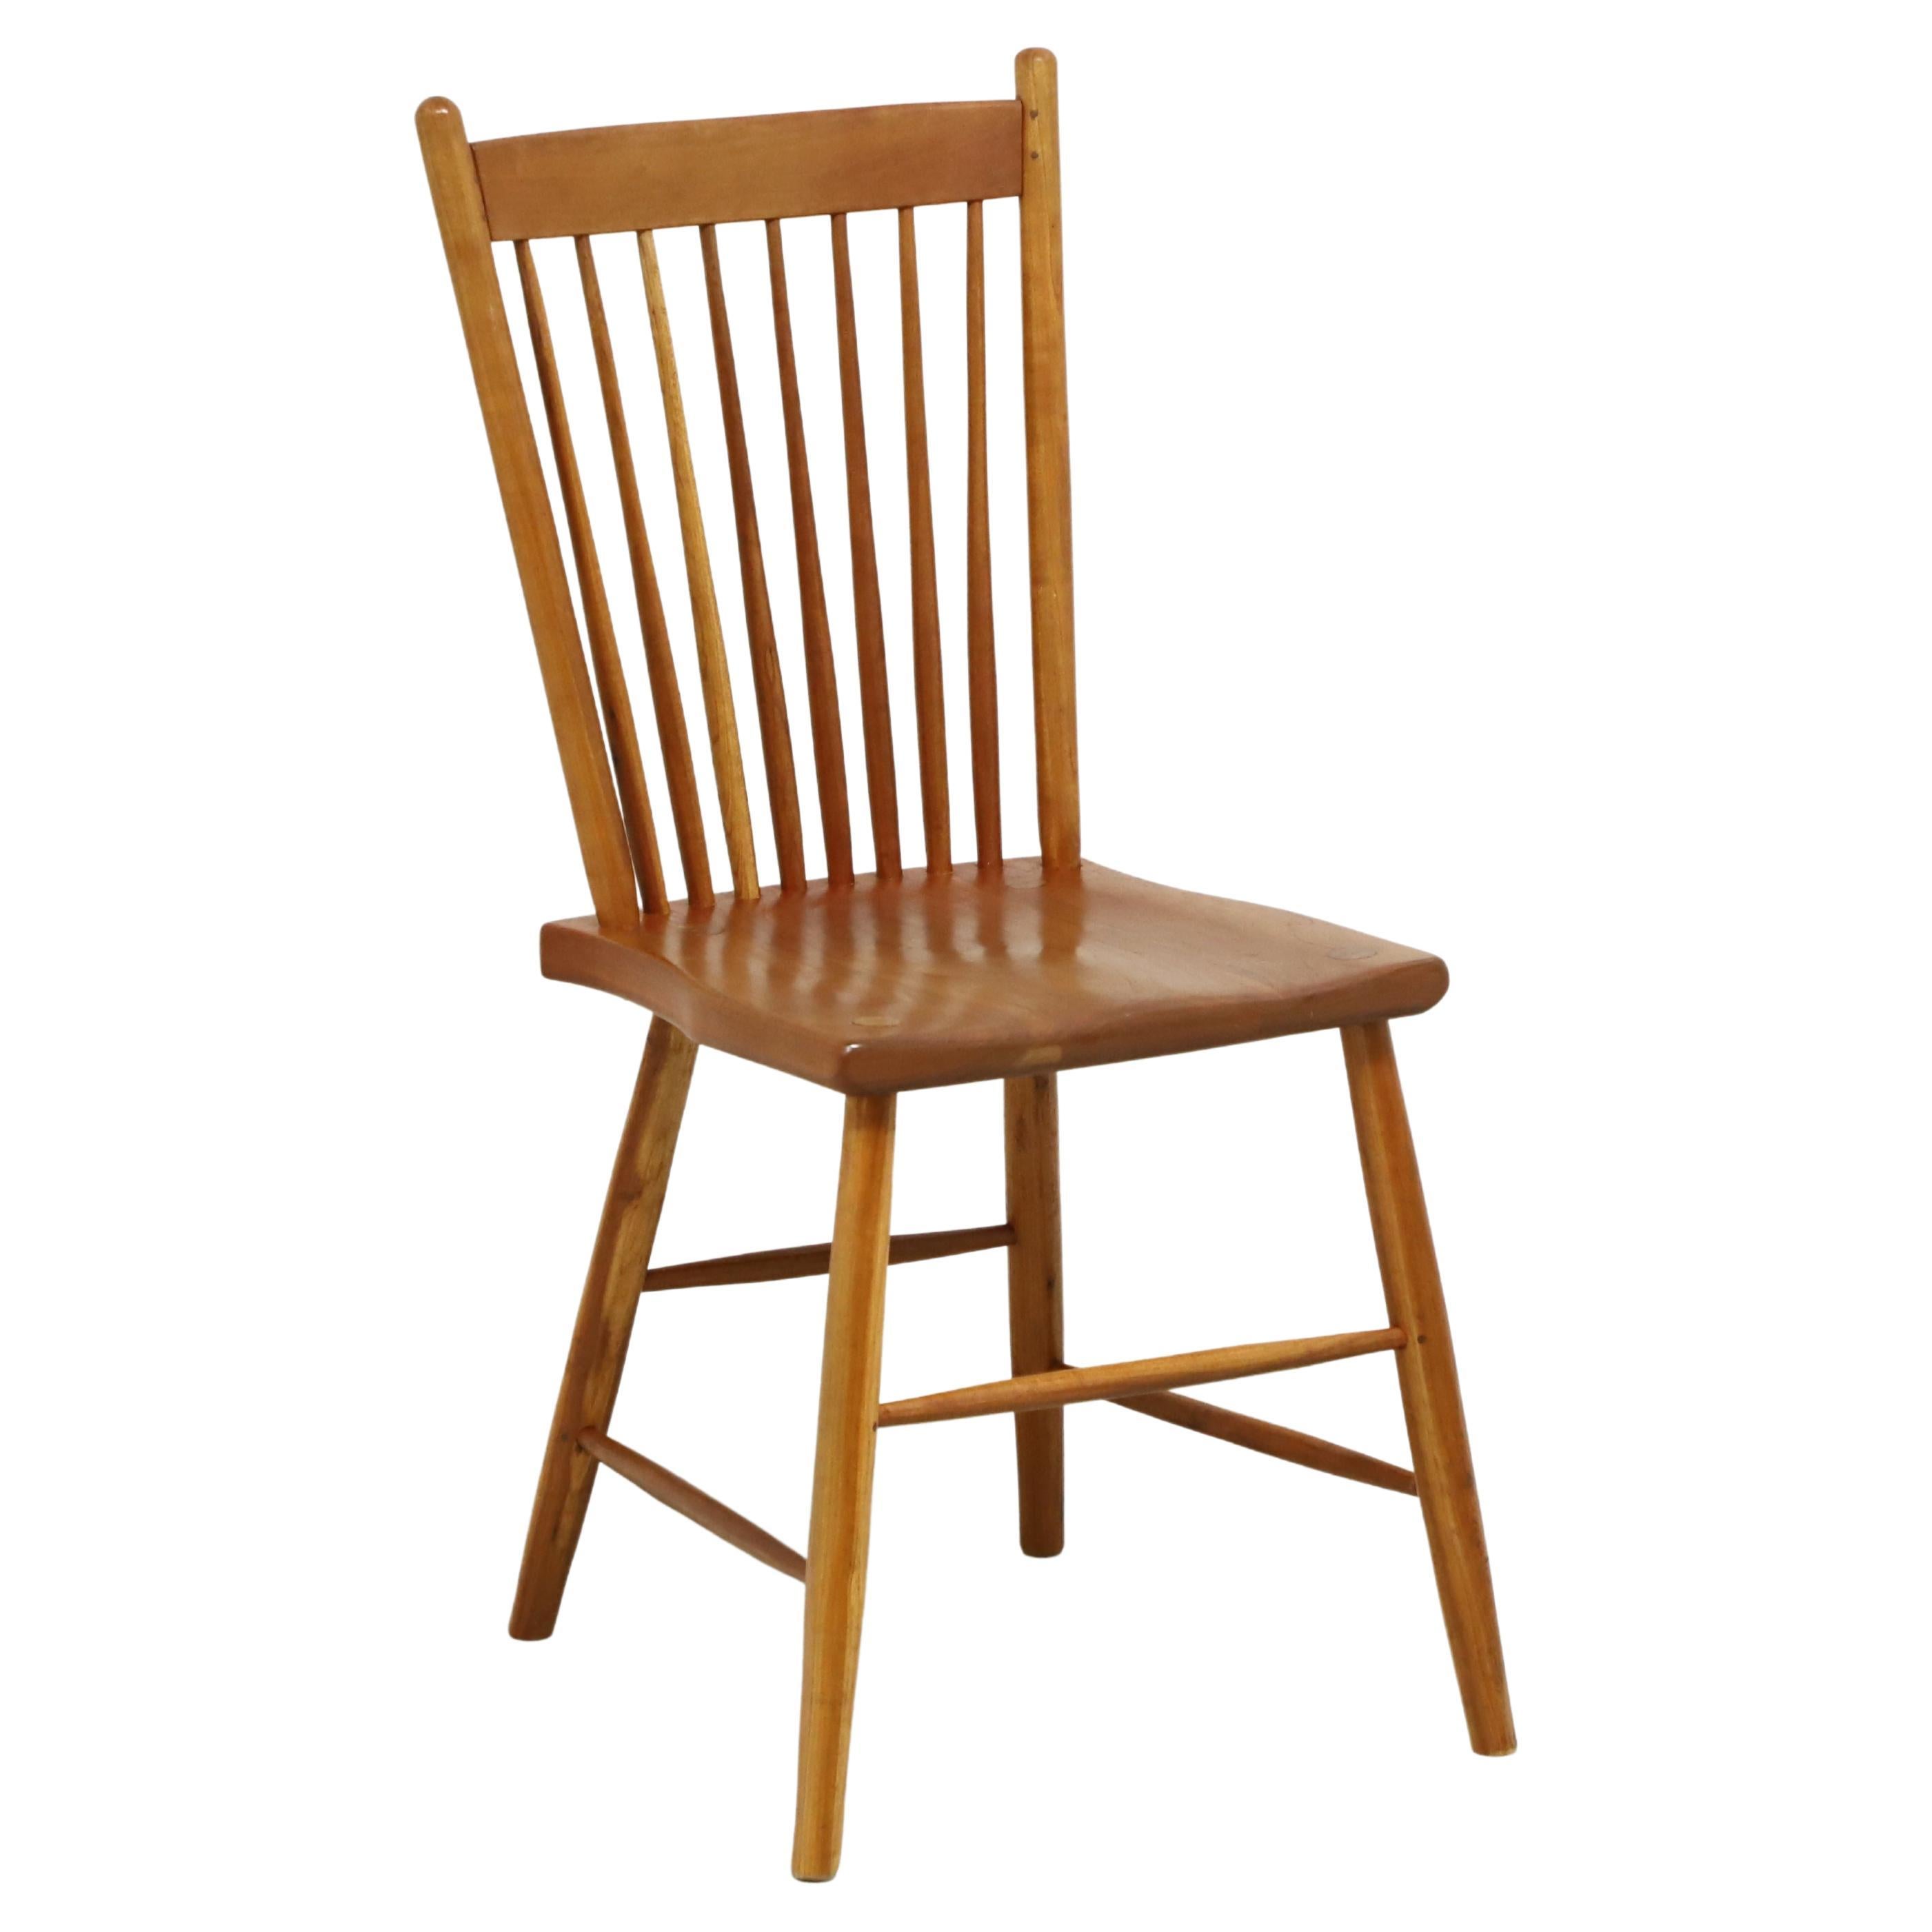 Minnesota Black Cherry Spindle Back Side Chair